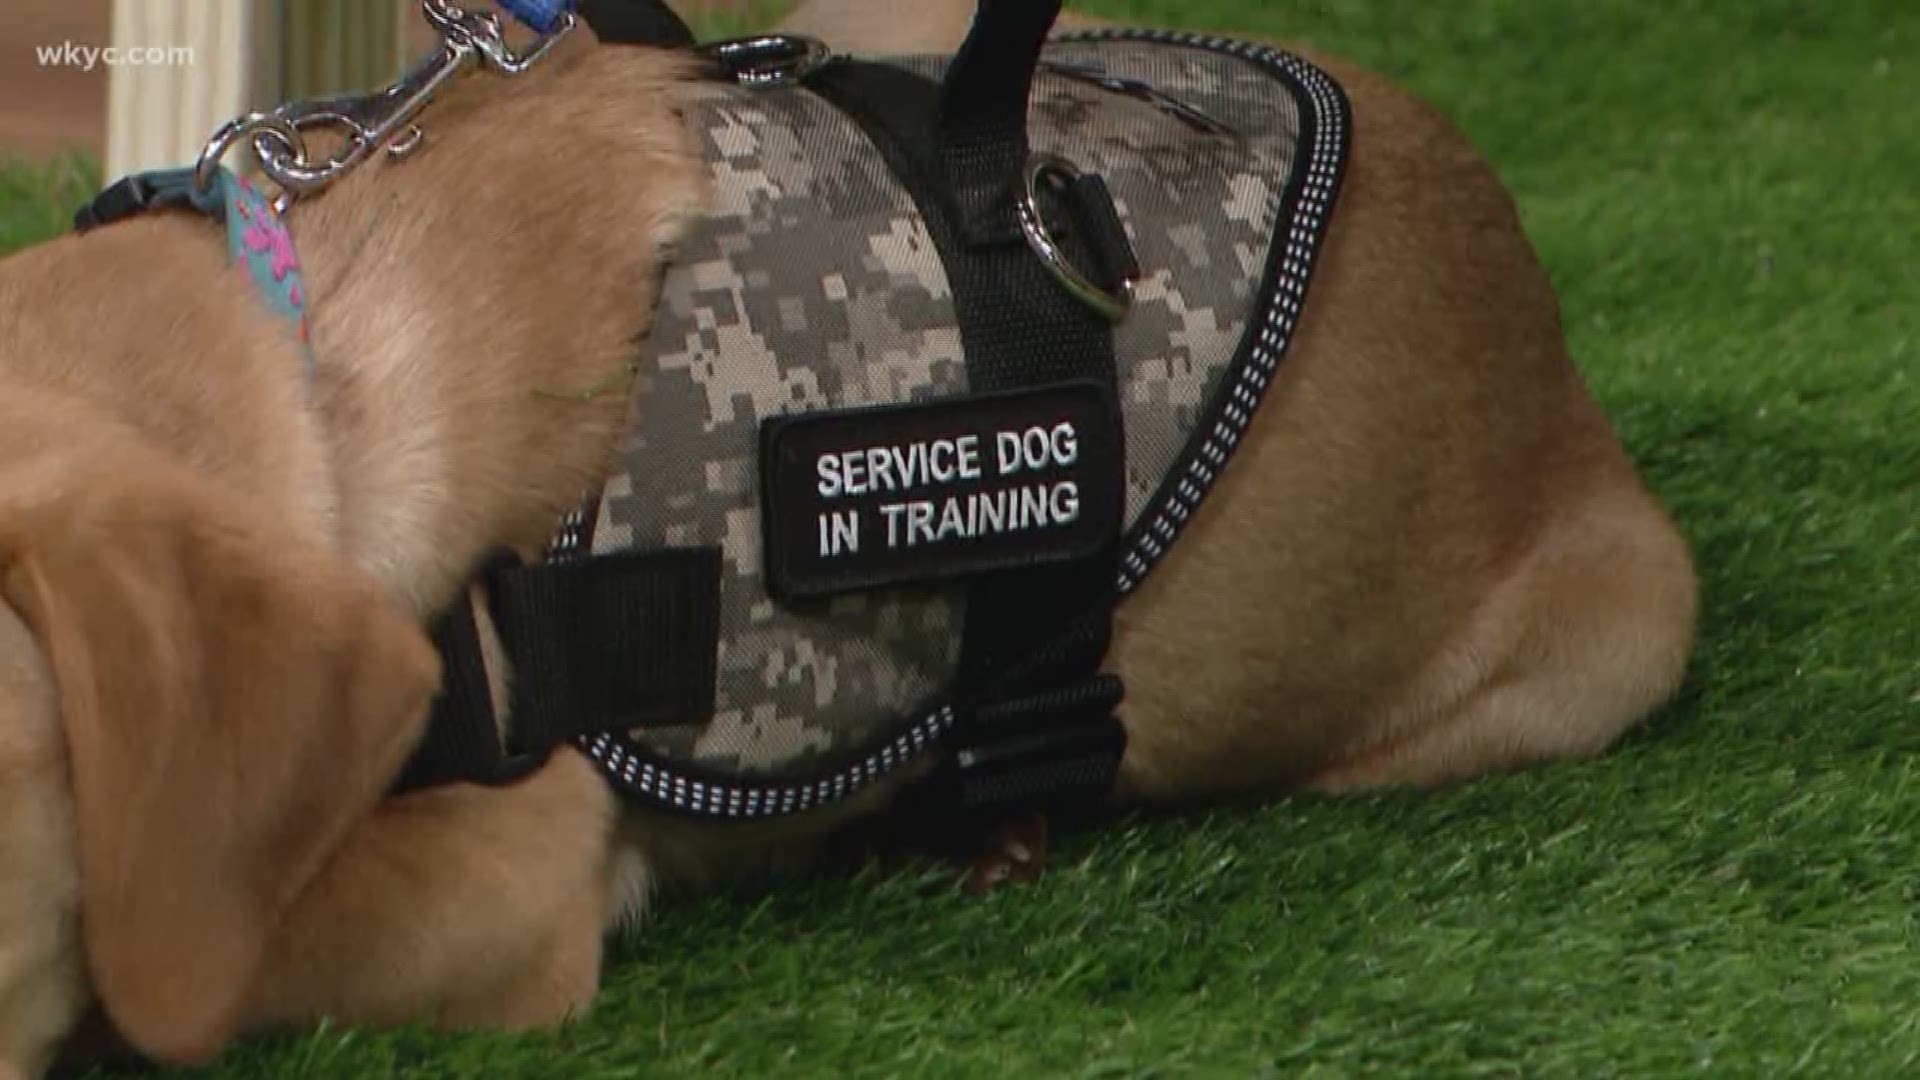 April 2, 2019: It's the next step in Roxy's training to become a Wags 4 Warriors service dog. She's now starting to wear her 'service dog in training' vest.